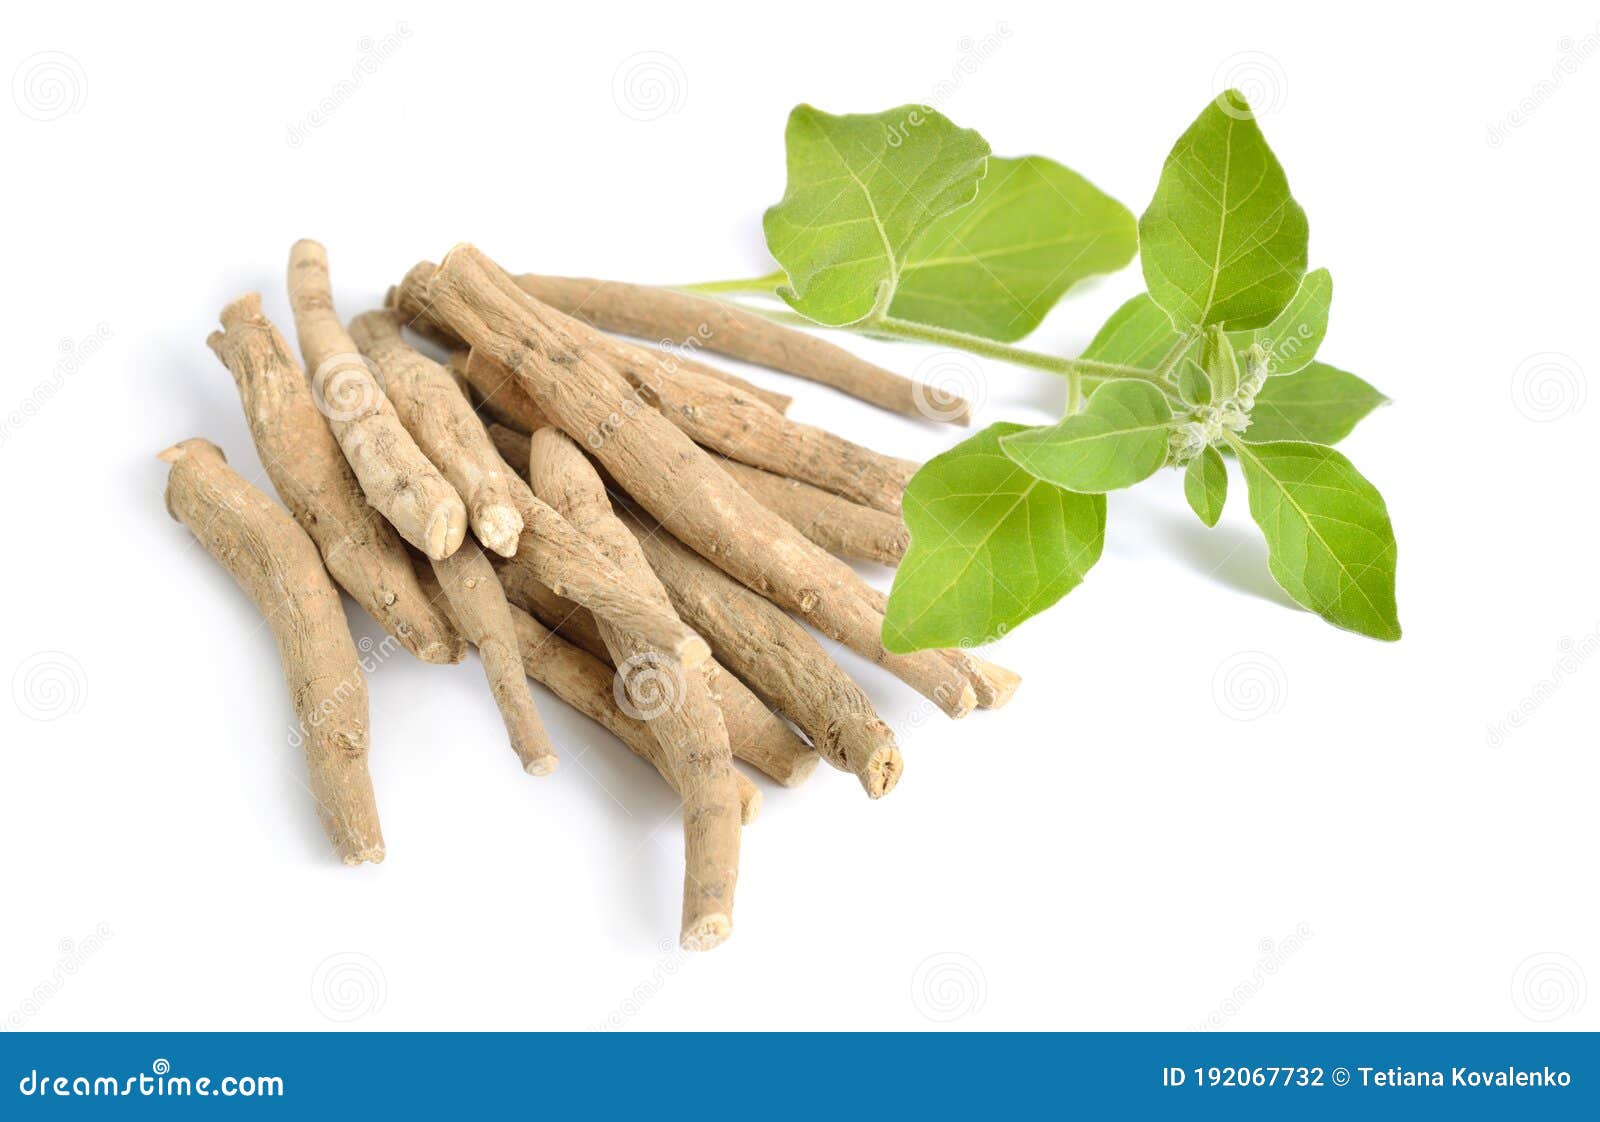 root withania somnifera, known commonly as ashwagandha, indian ginseng, poison gooseberry or winter cherry